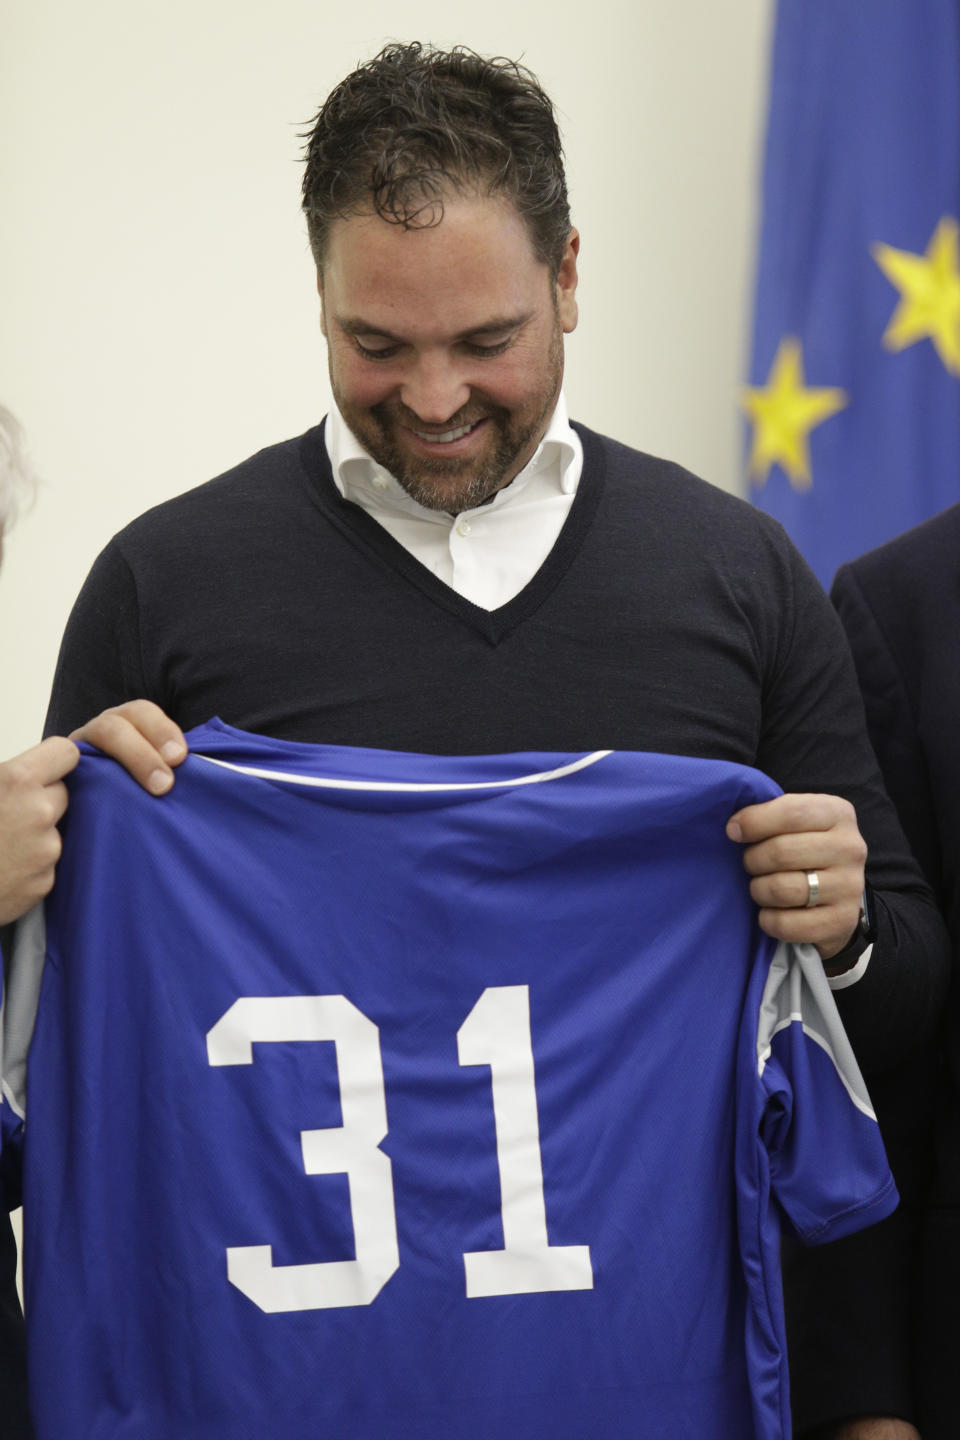 Hall of Fame catcher Mike Piazza shows his jersey during his presentation as Italy's national baseball team coach, at the Italian Olympic Committee headquarters in Rome, Friday, Nov. 29, 2019. (AP Photo/Alberto Pellaschiar)